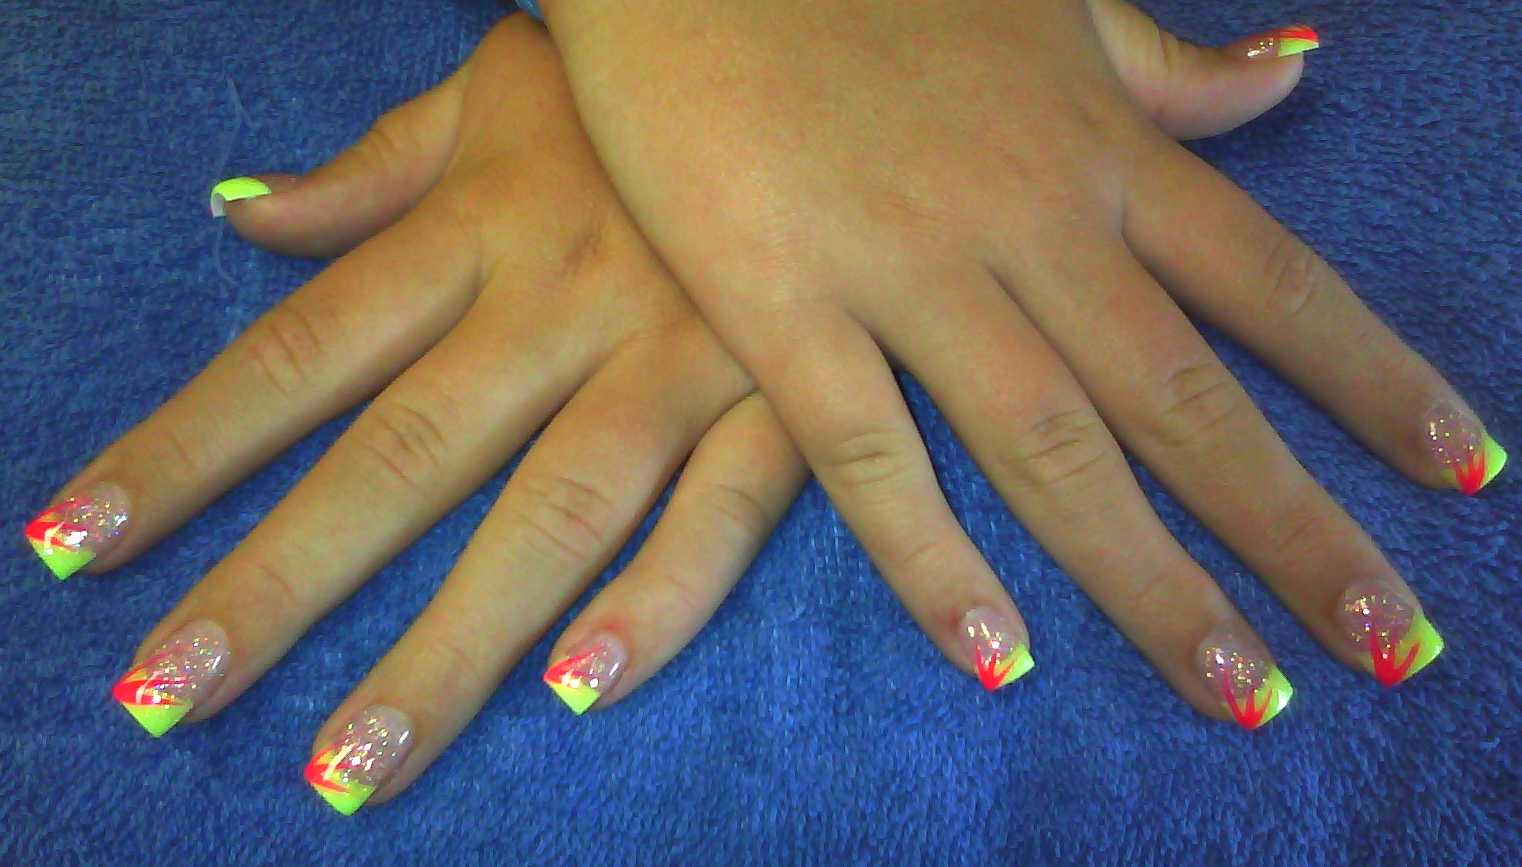 3. Acrylic nail design with neon colors - wide 1